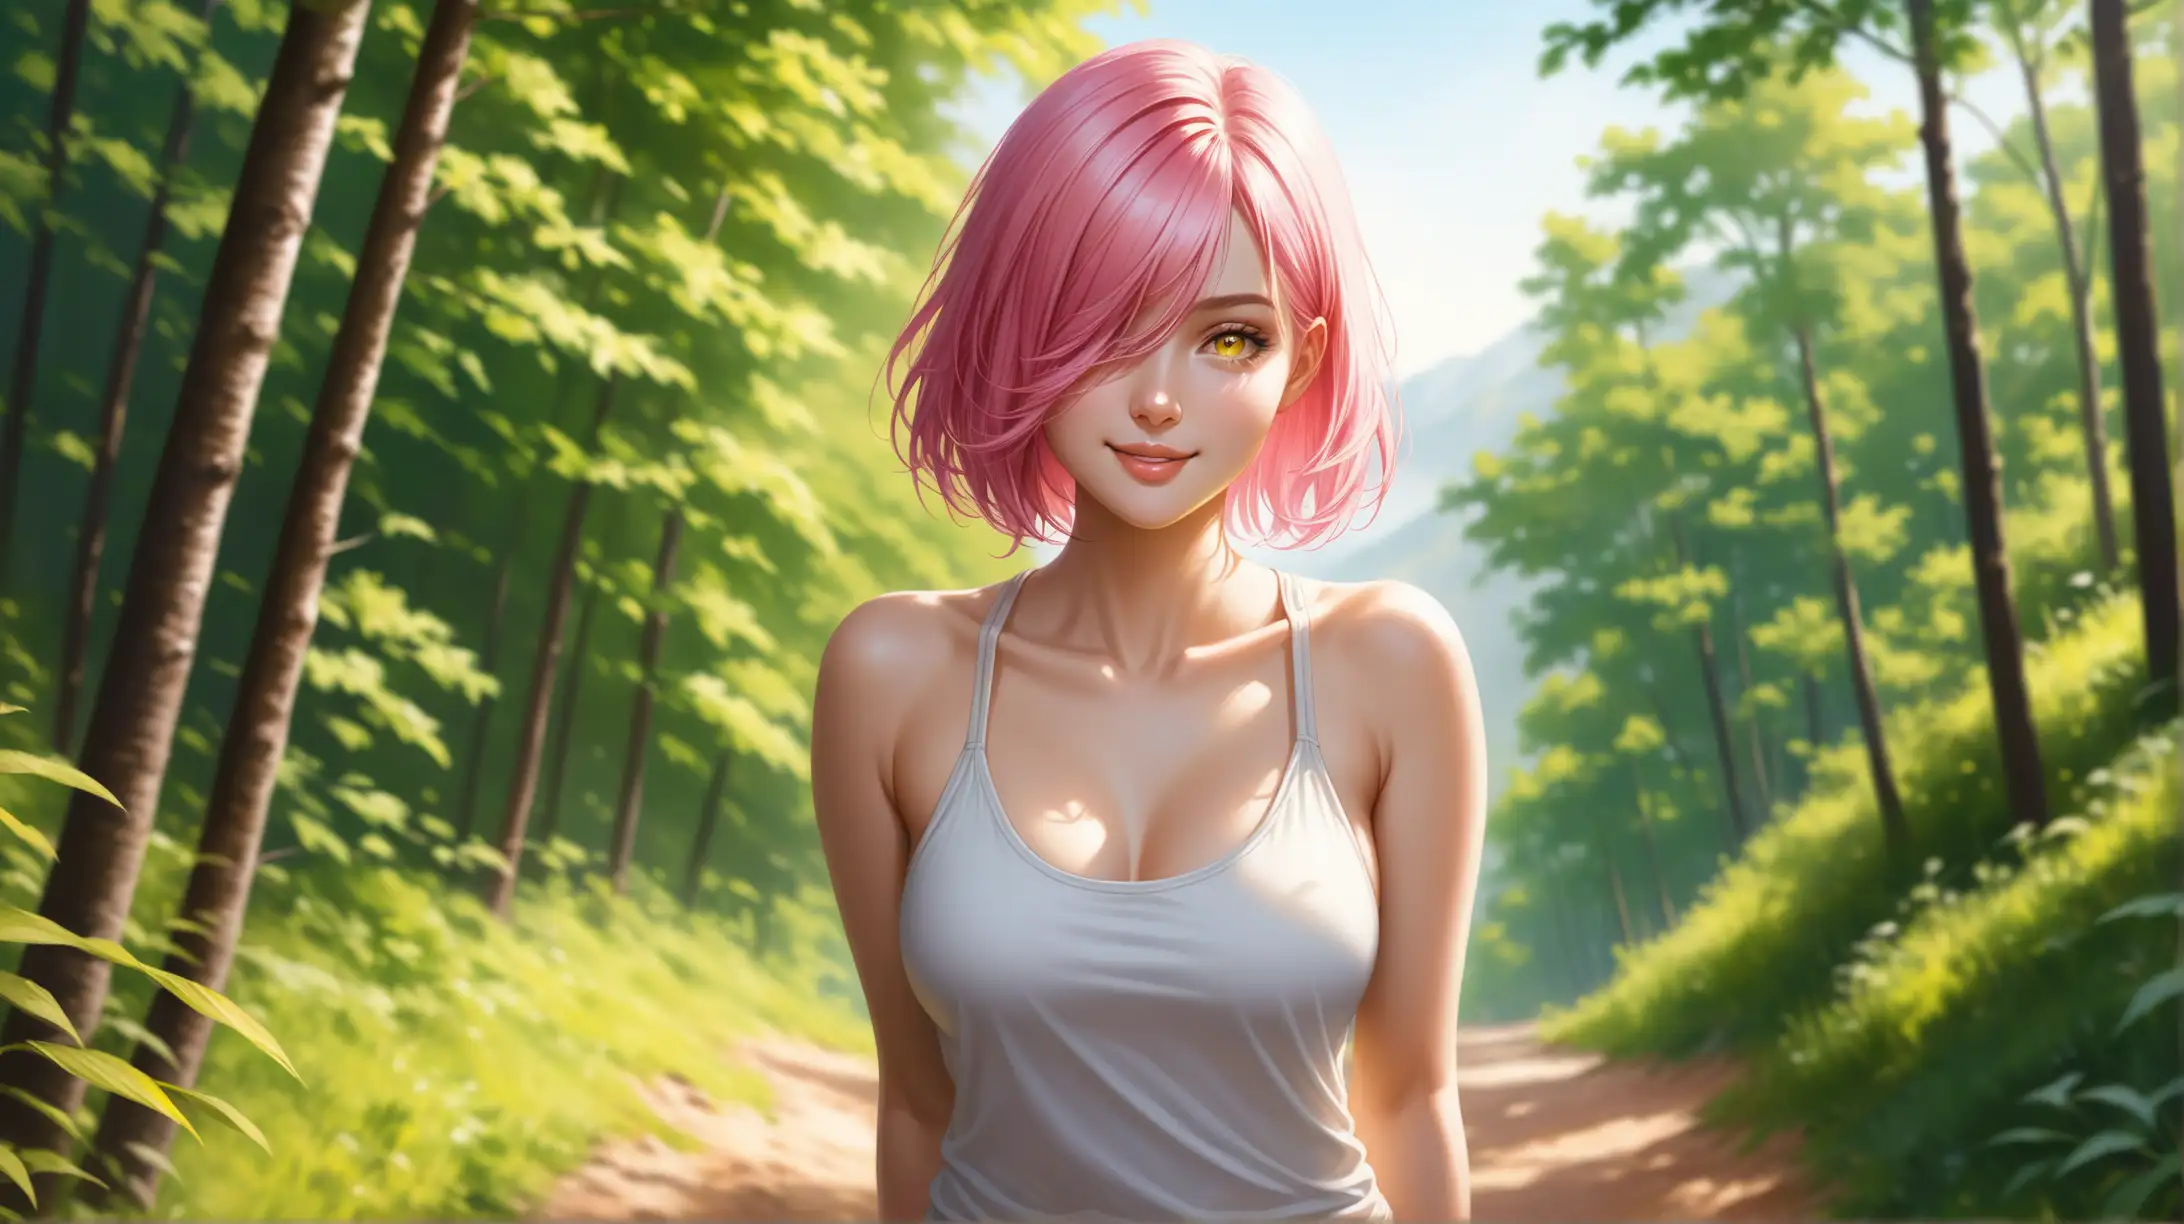 Seductive Summer Hike Woman with Pink Hair Smiling Outdoors